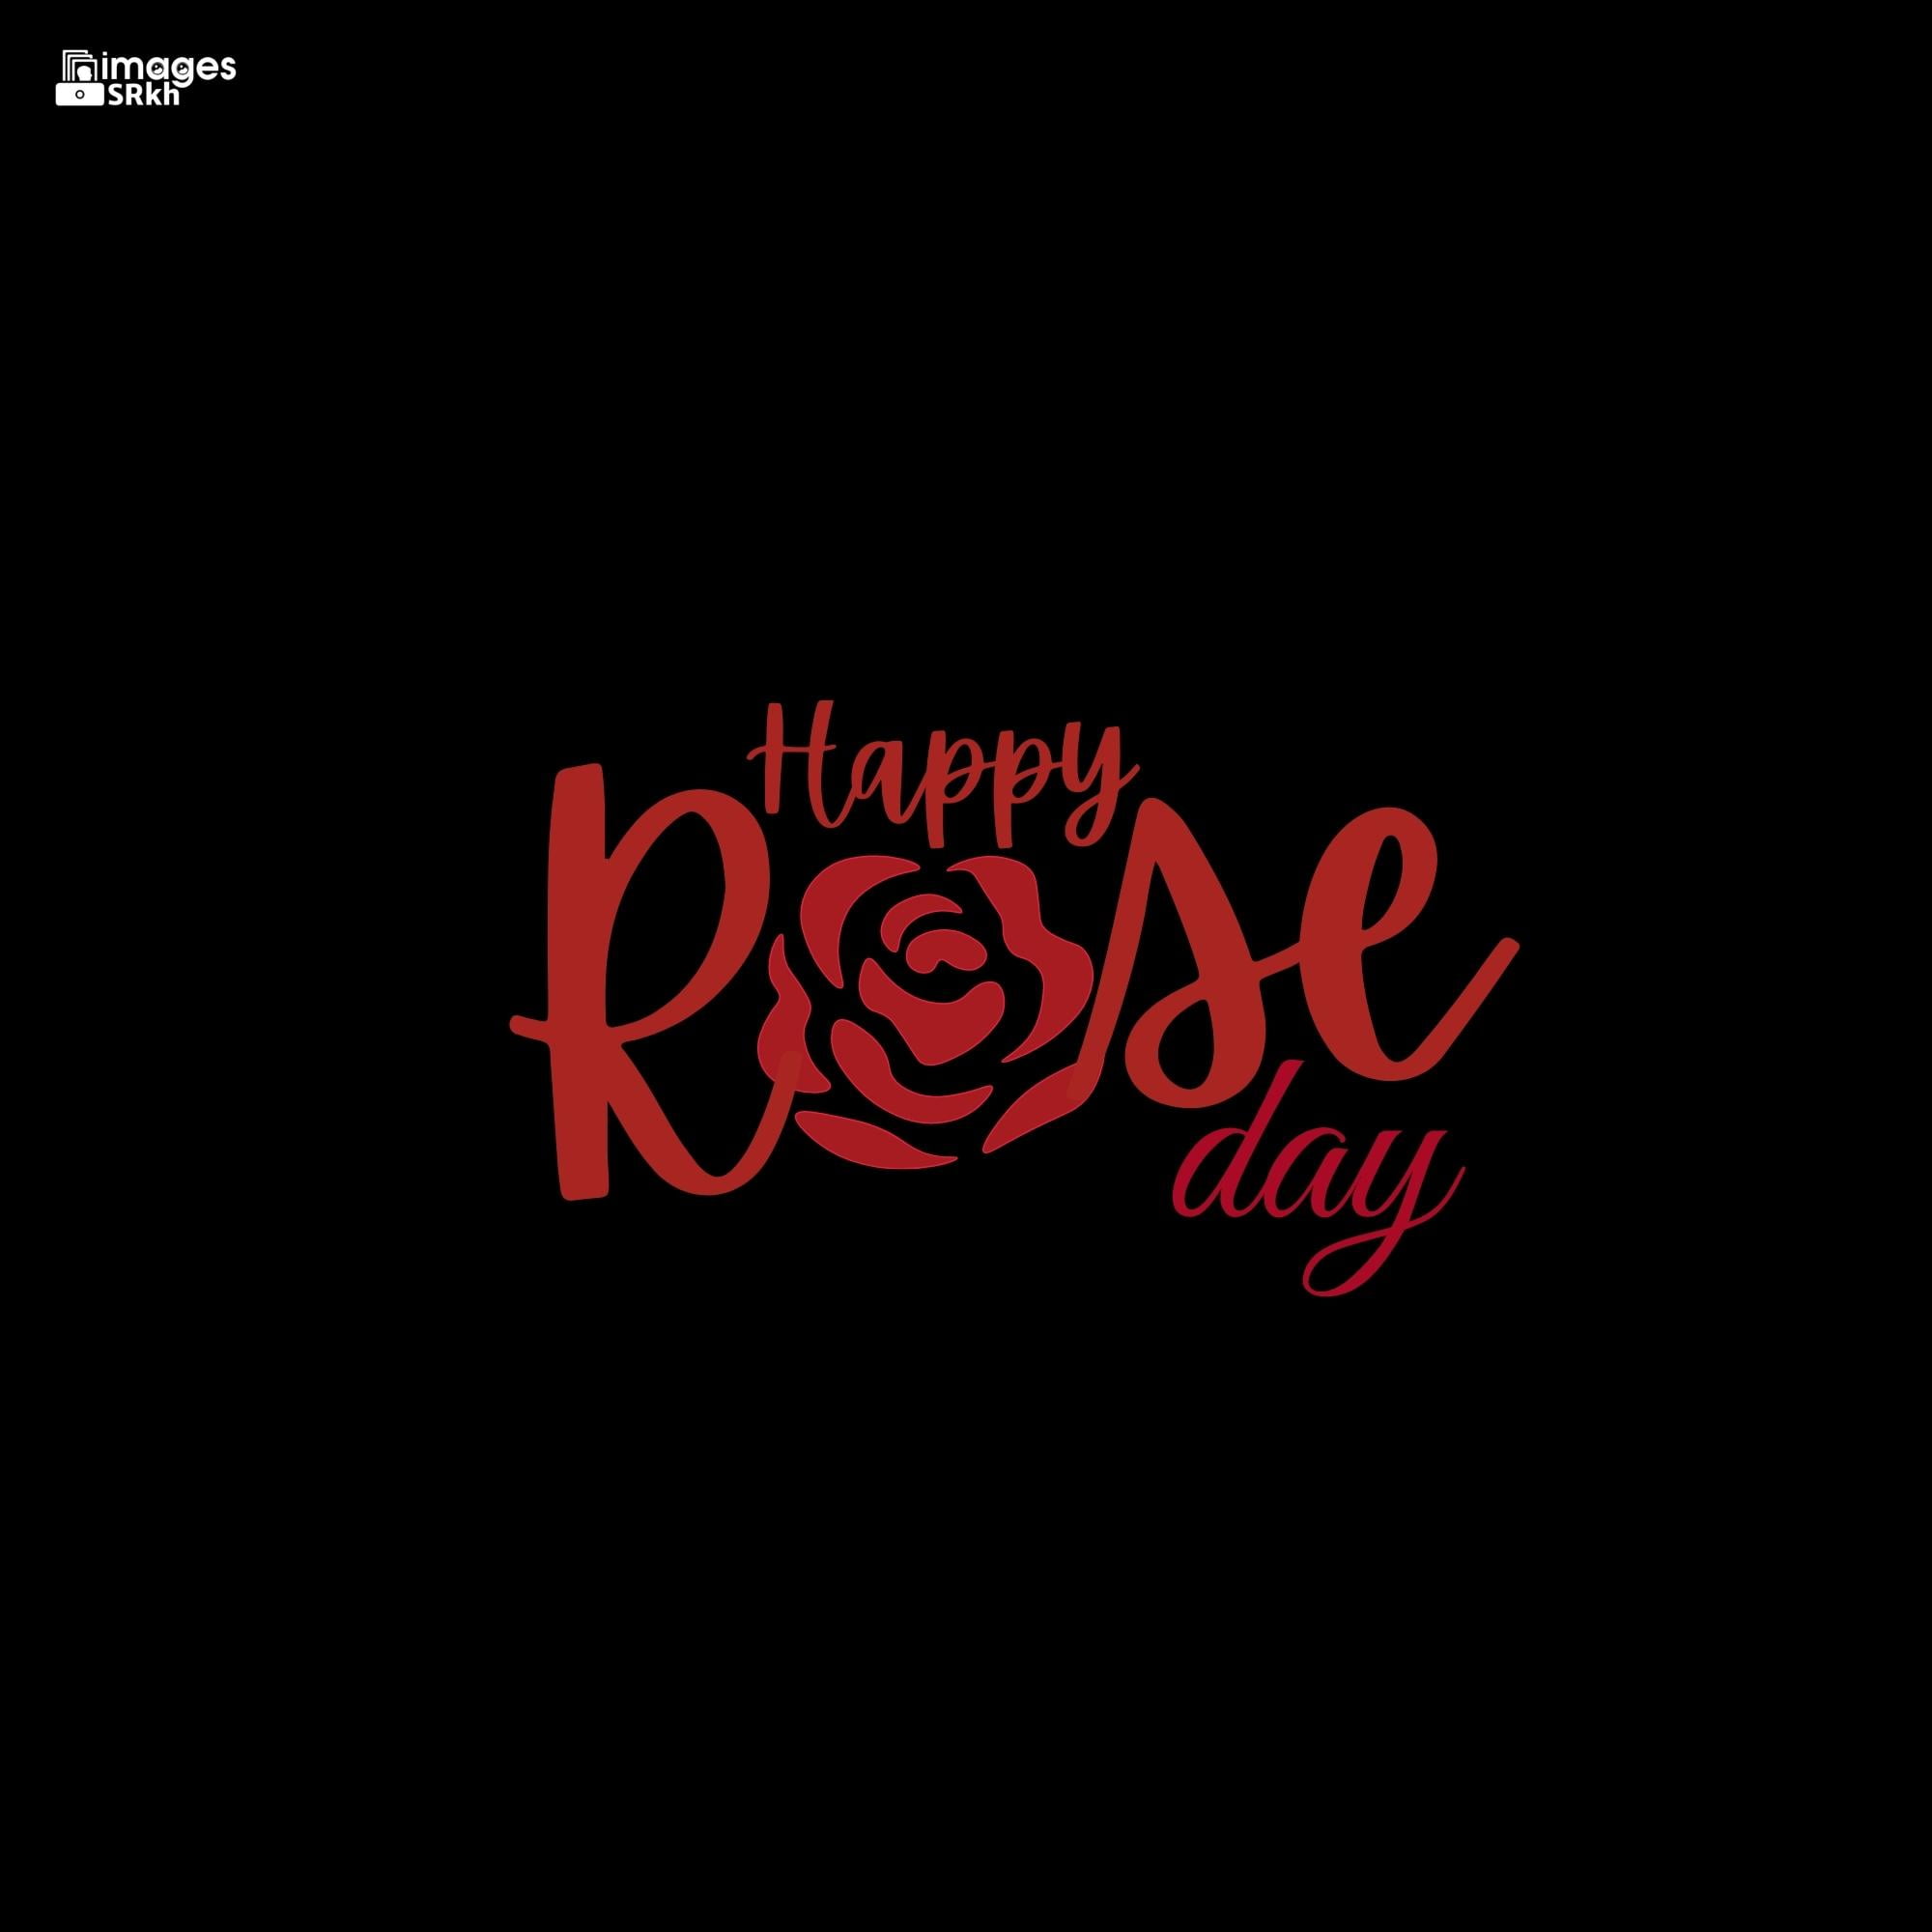 Happy Rose Day Image Hd Download (12)